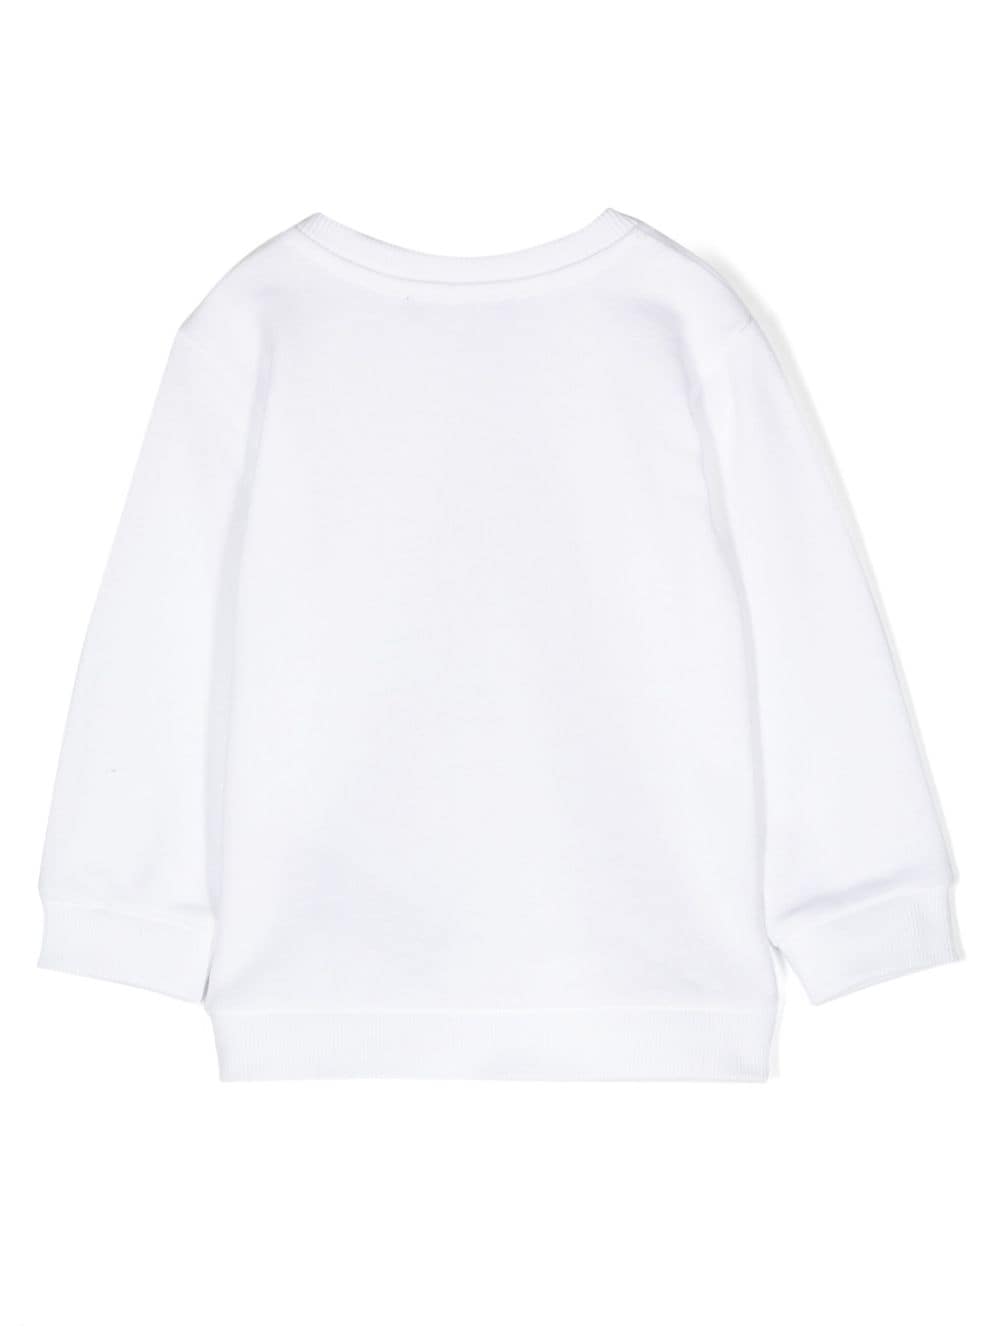 White sweatshirt for baby girls with gold logo